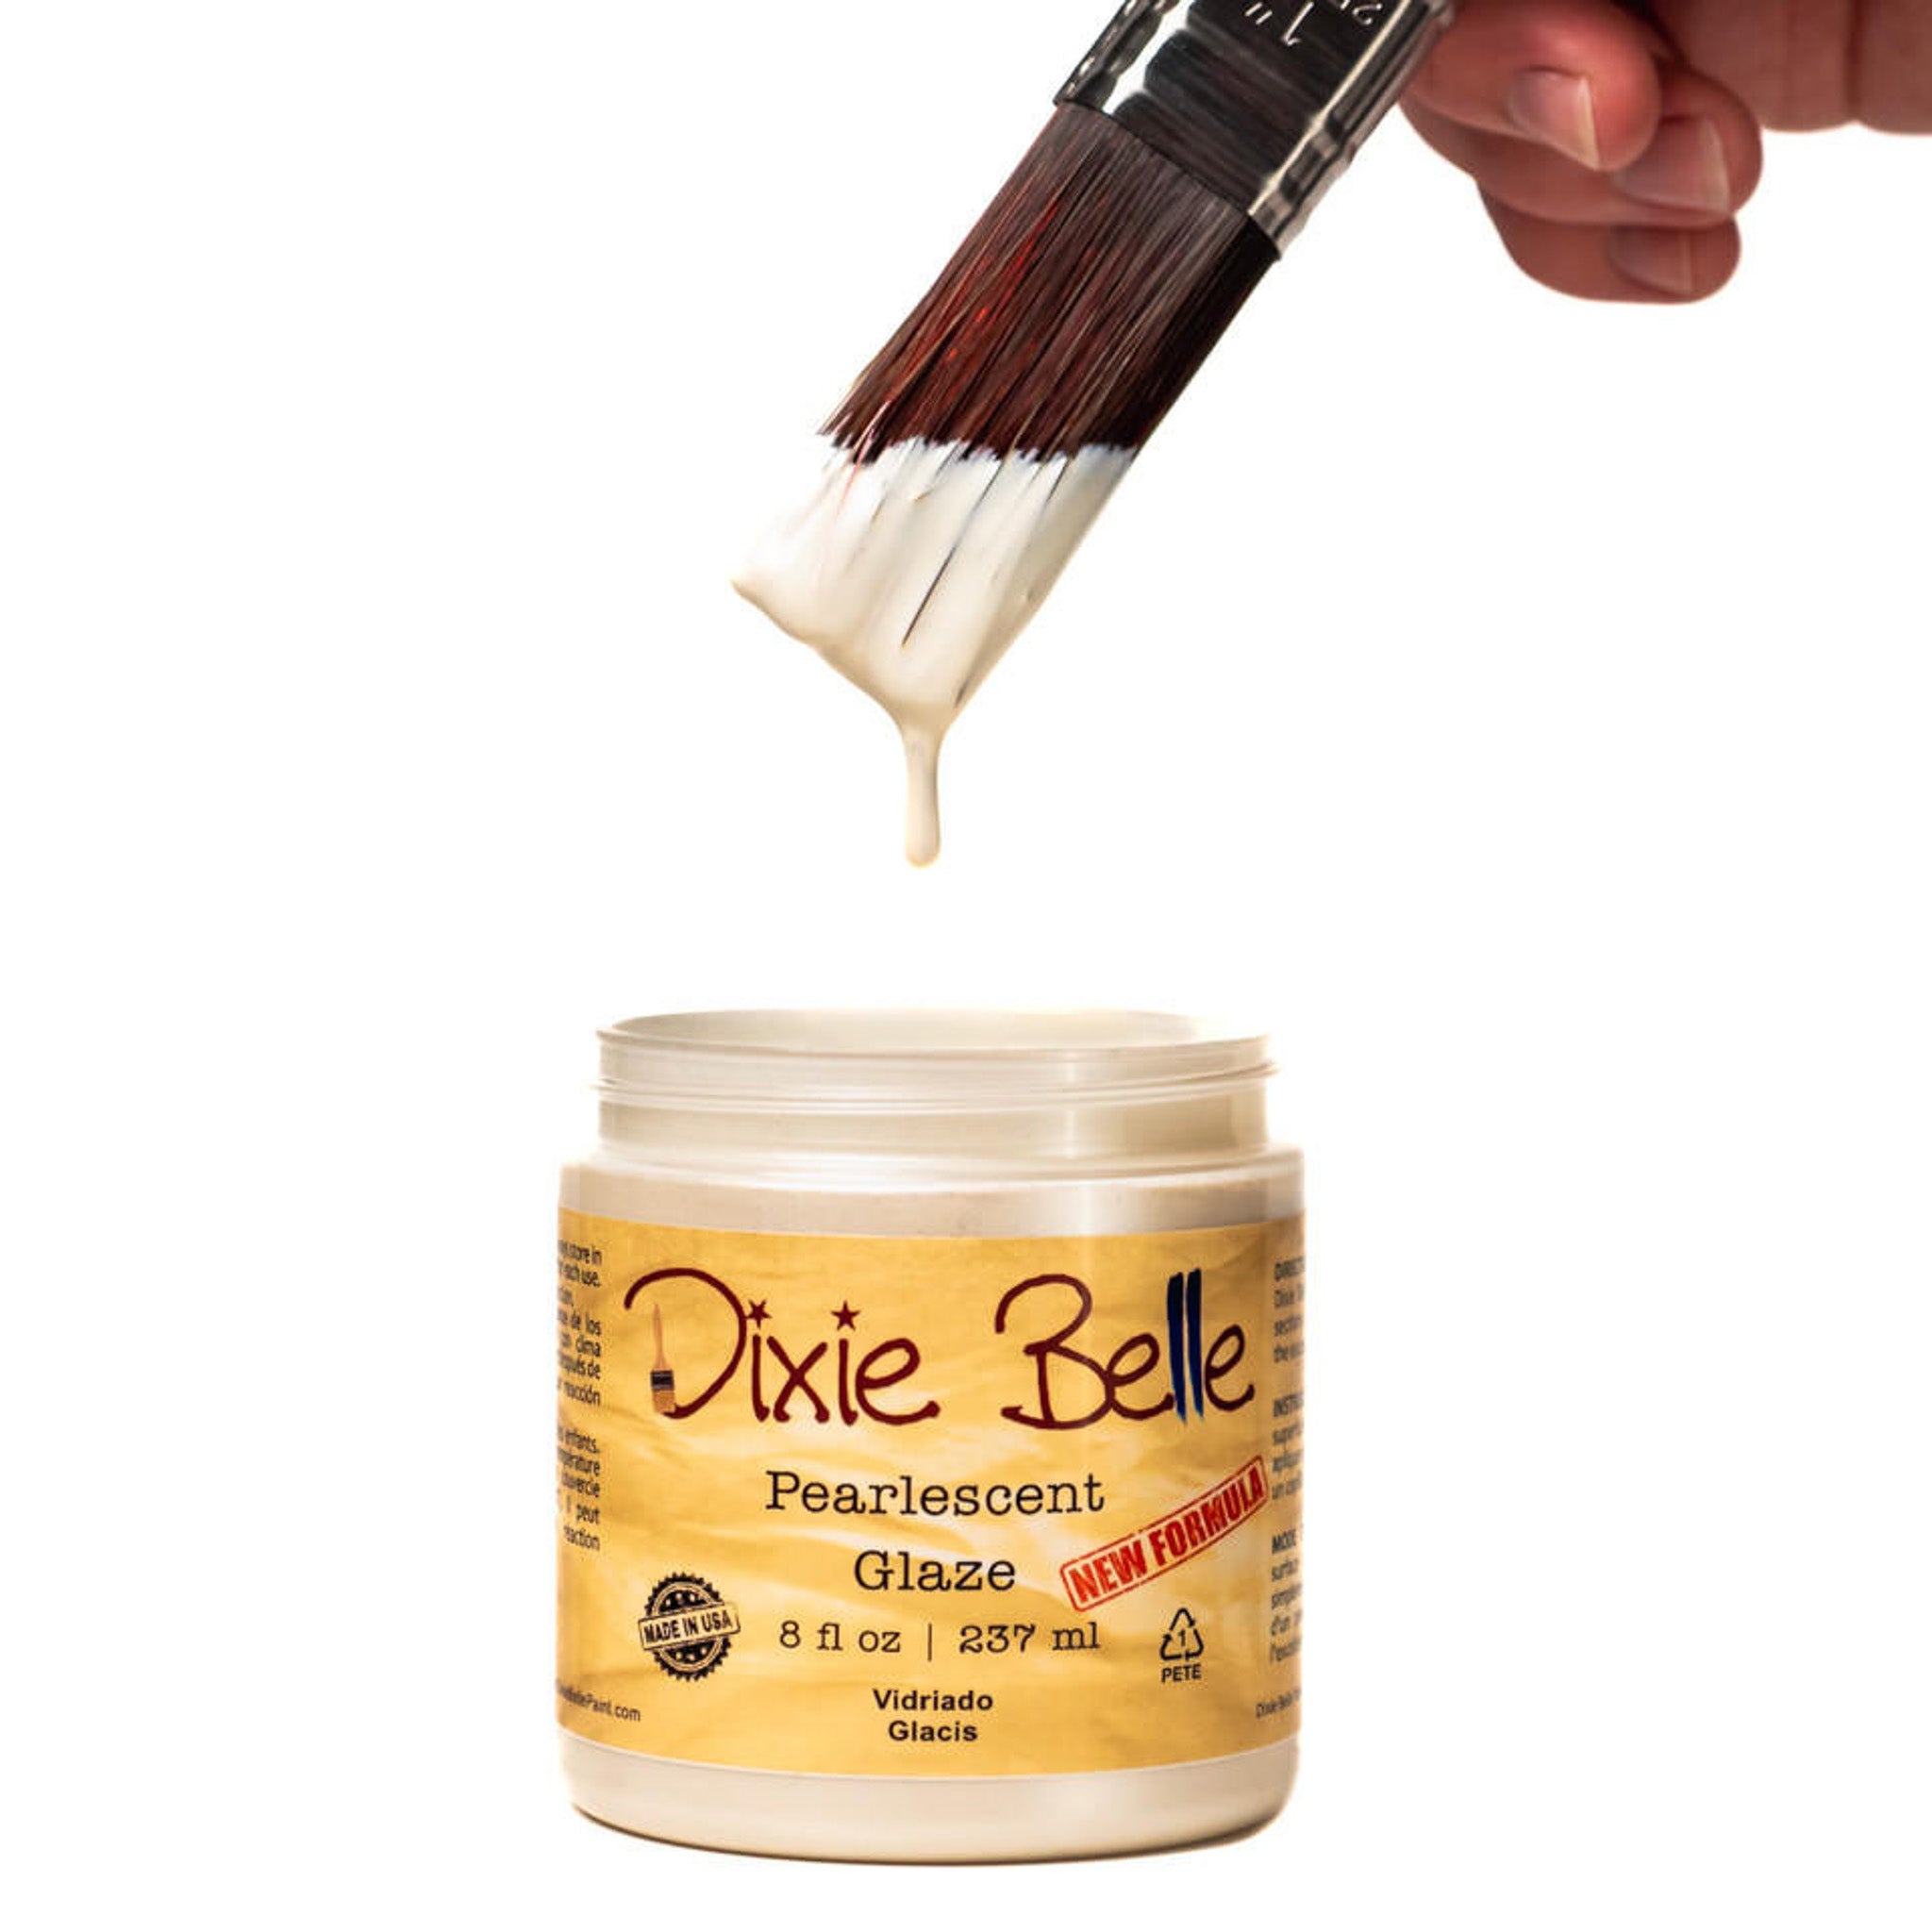 An open container of an 8oz/237ml Dixie Belle Pearlescent Glaze with a dripping paintbrush above it is against a white background.